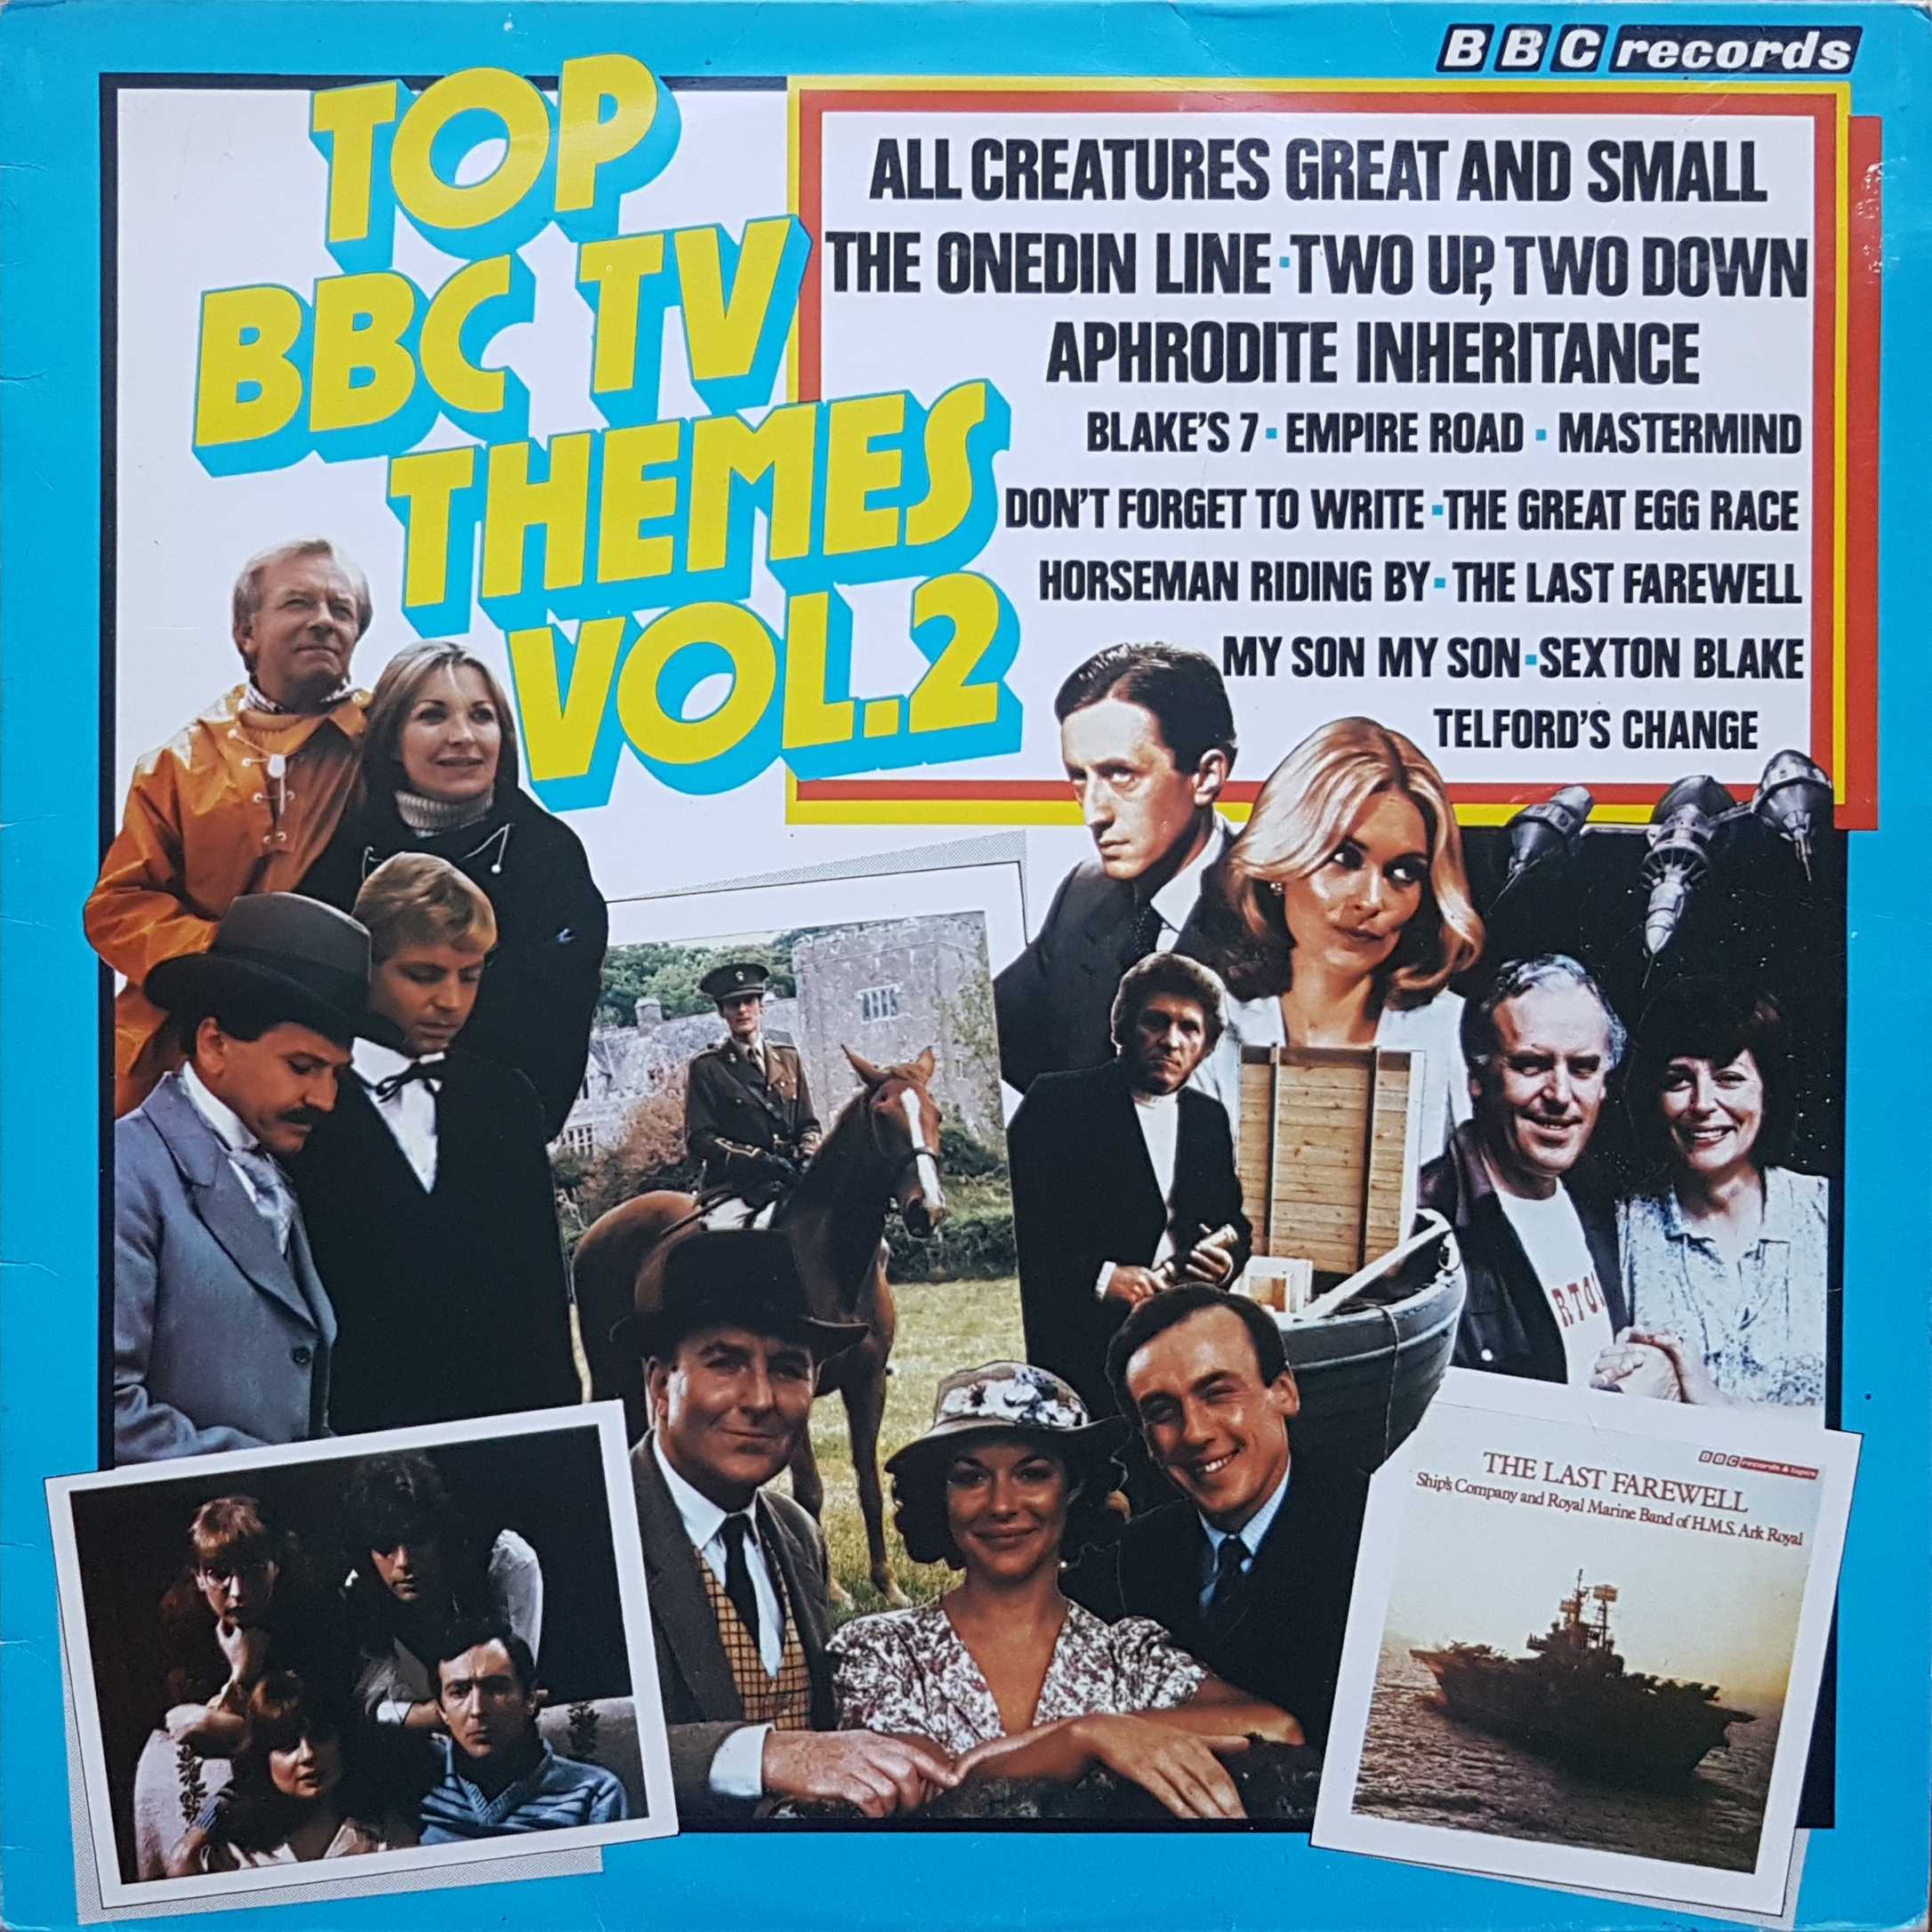 Picture of REH 365 Top BBC TV themes - Volume 2 by artist Various